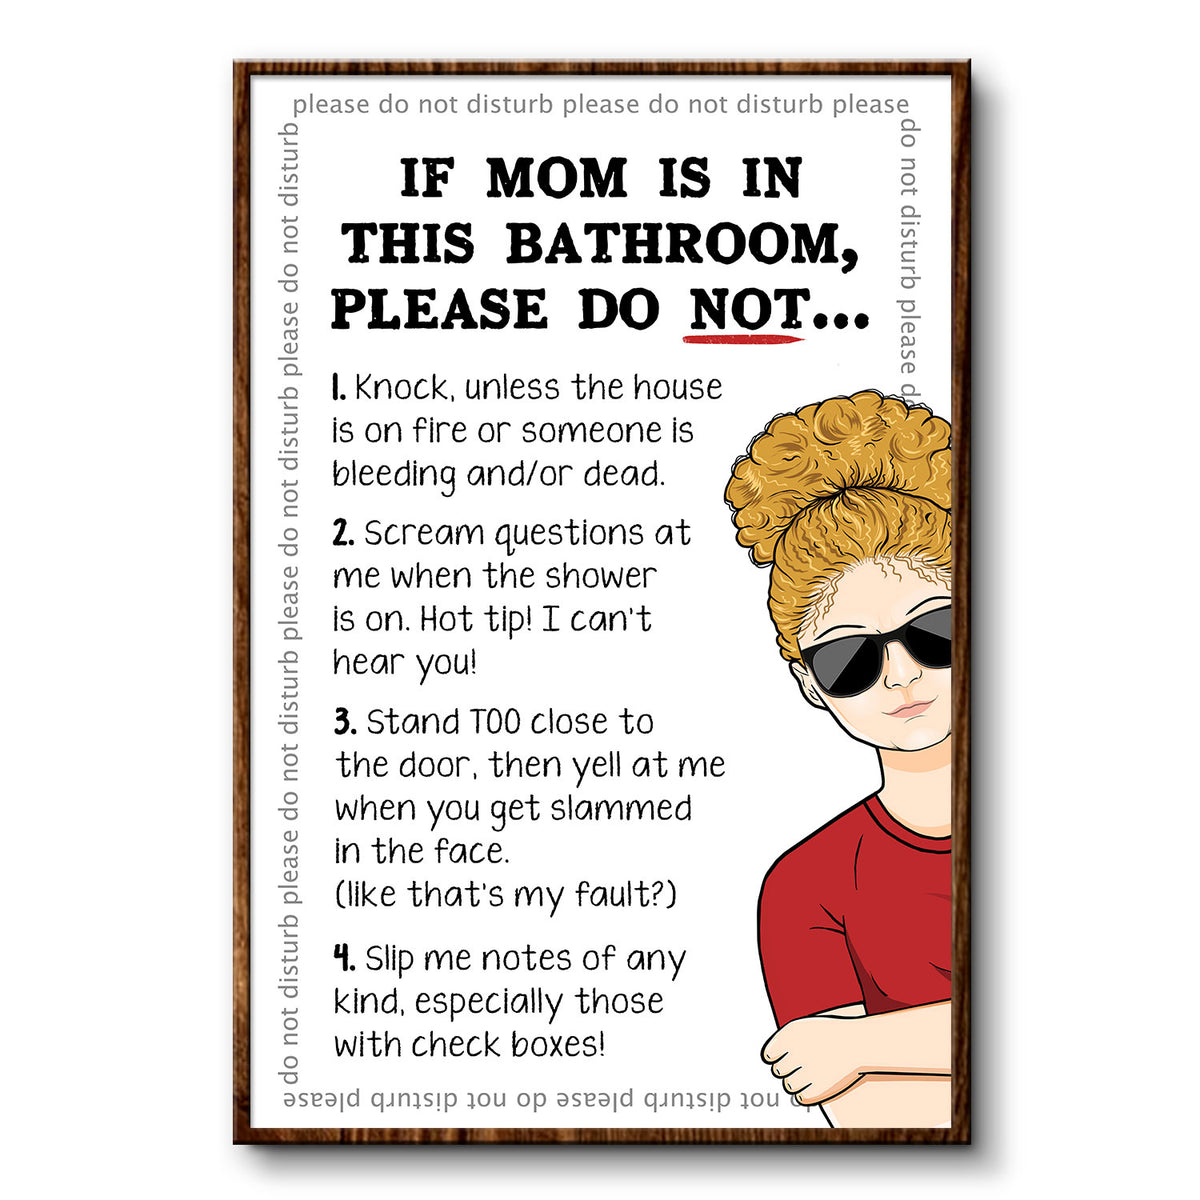 Discover Mom Is In This Bathroom - Funny Bathroom Decor Gift For Mom - Personalized Poster